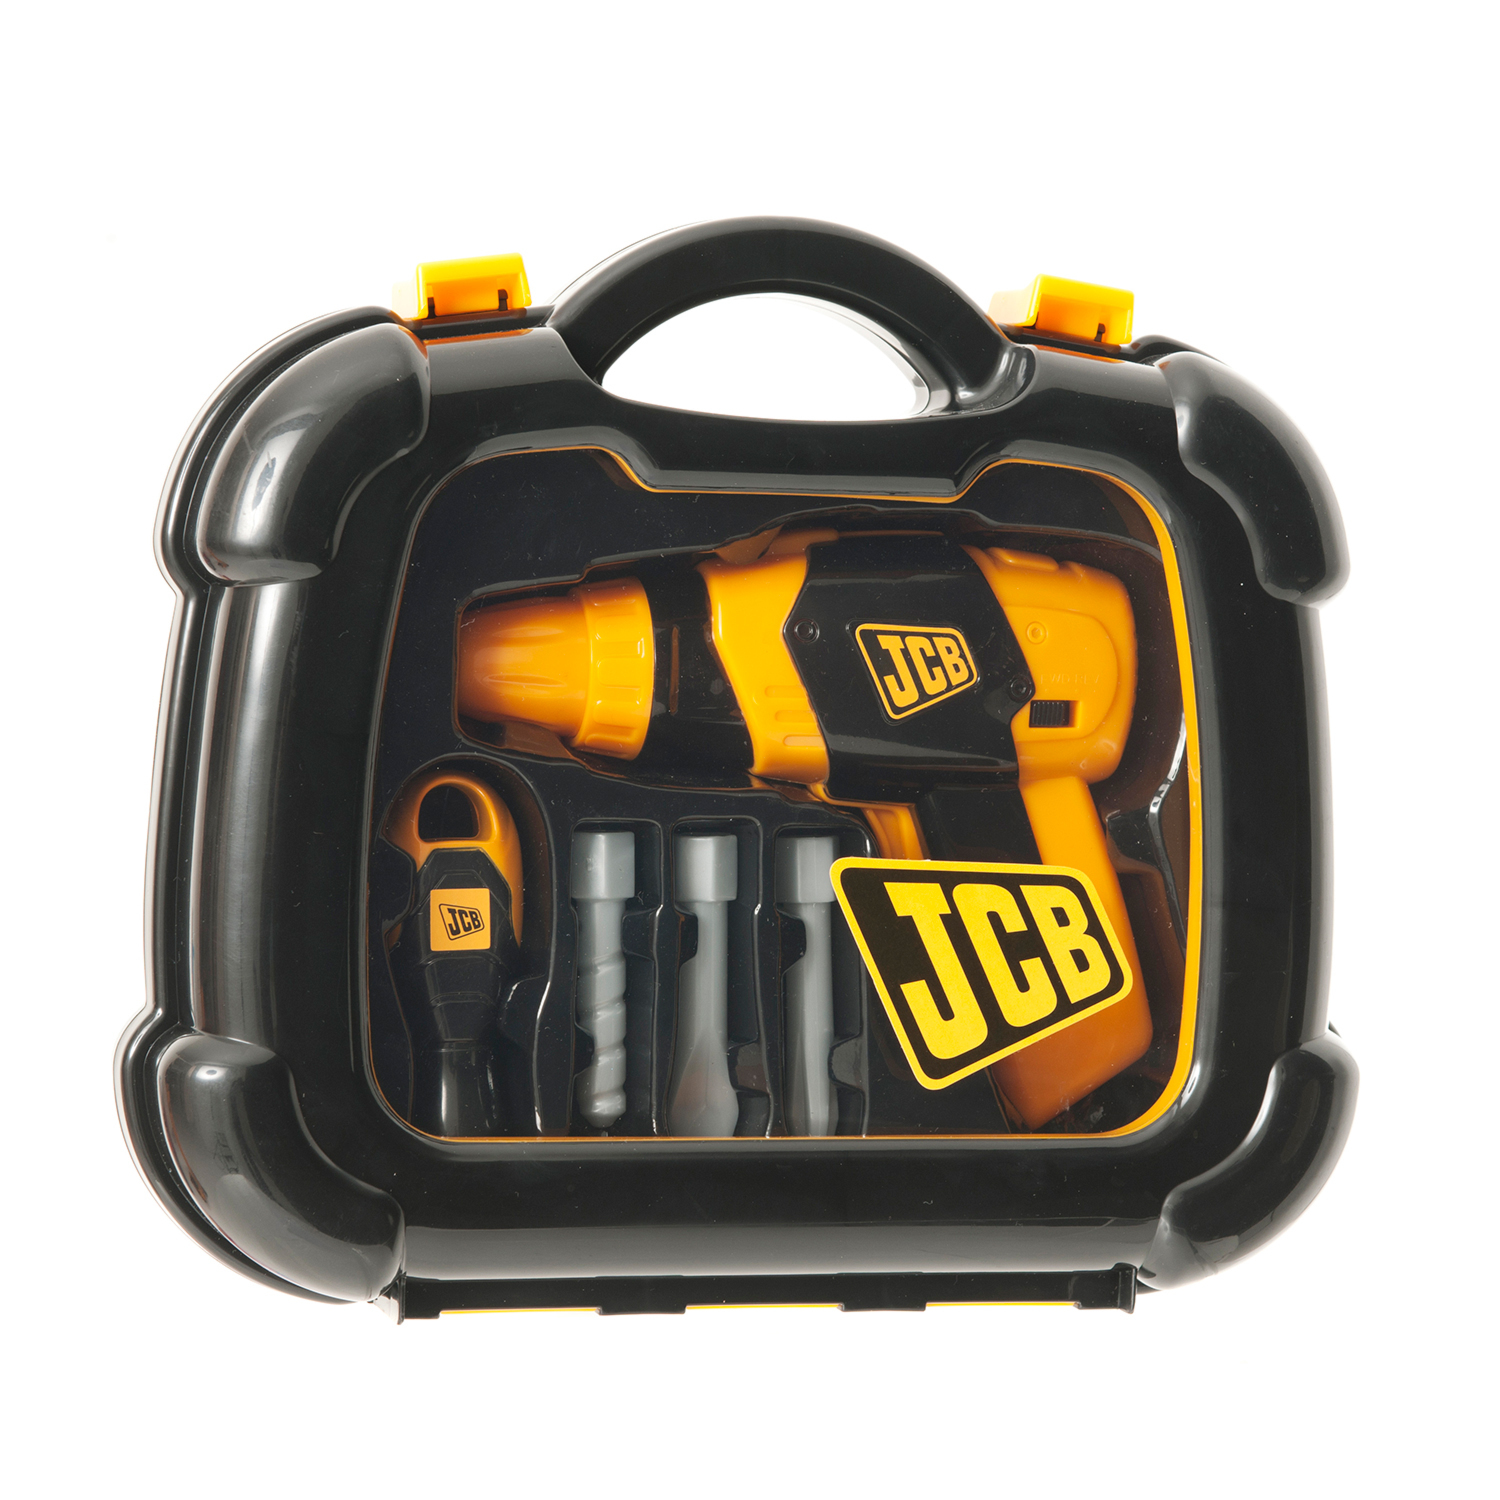 JCB Tool Case and Drill Toy Set Image